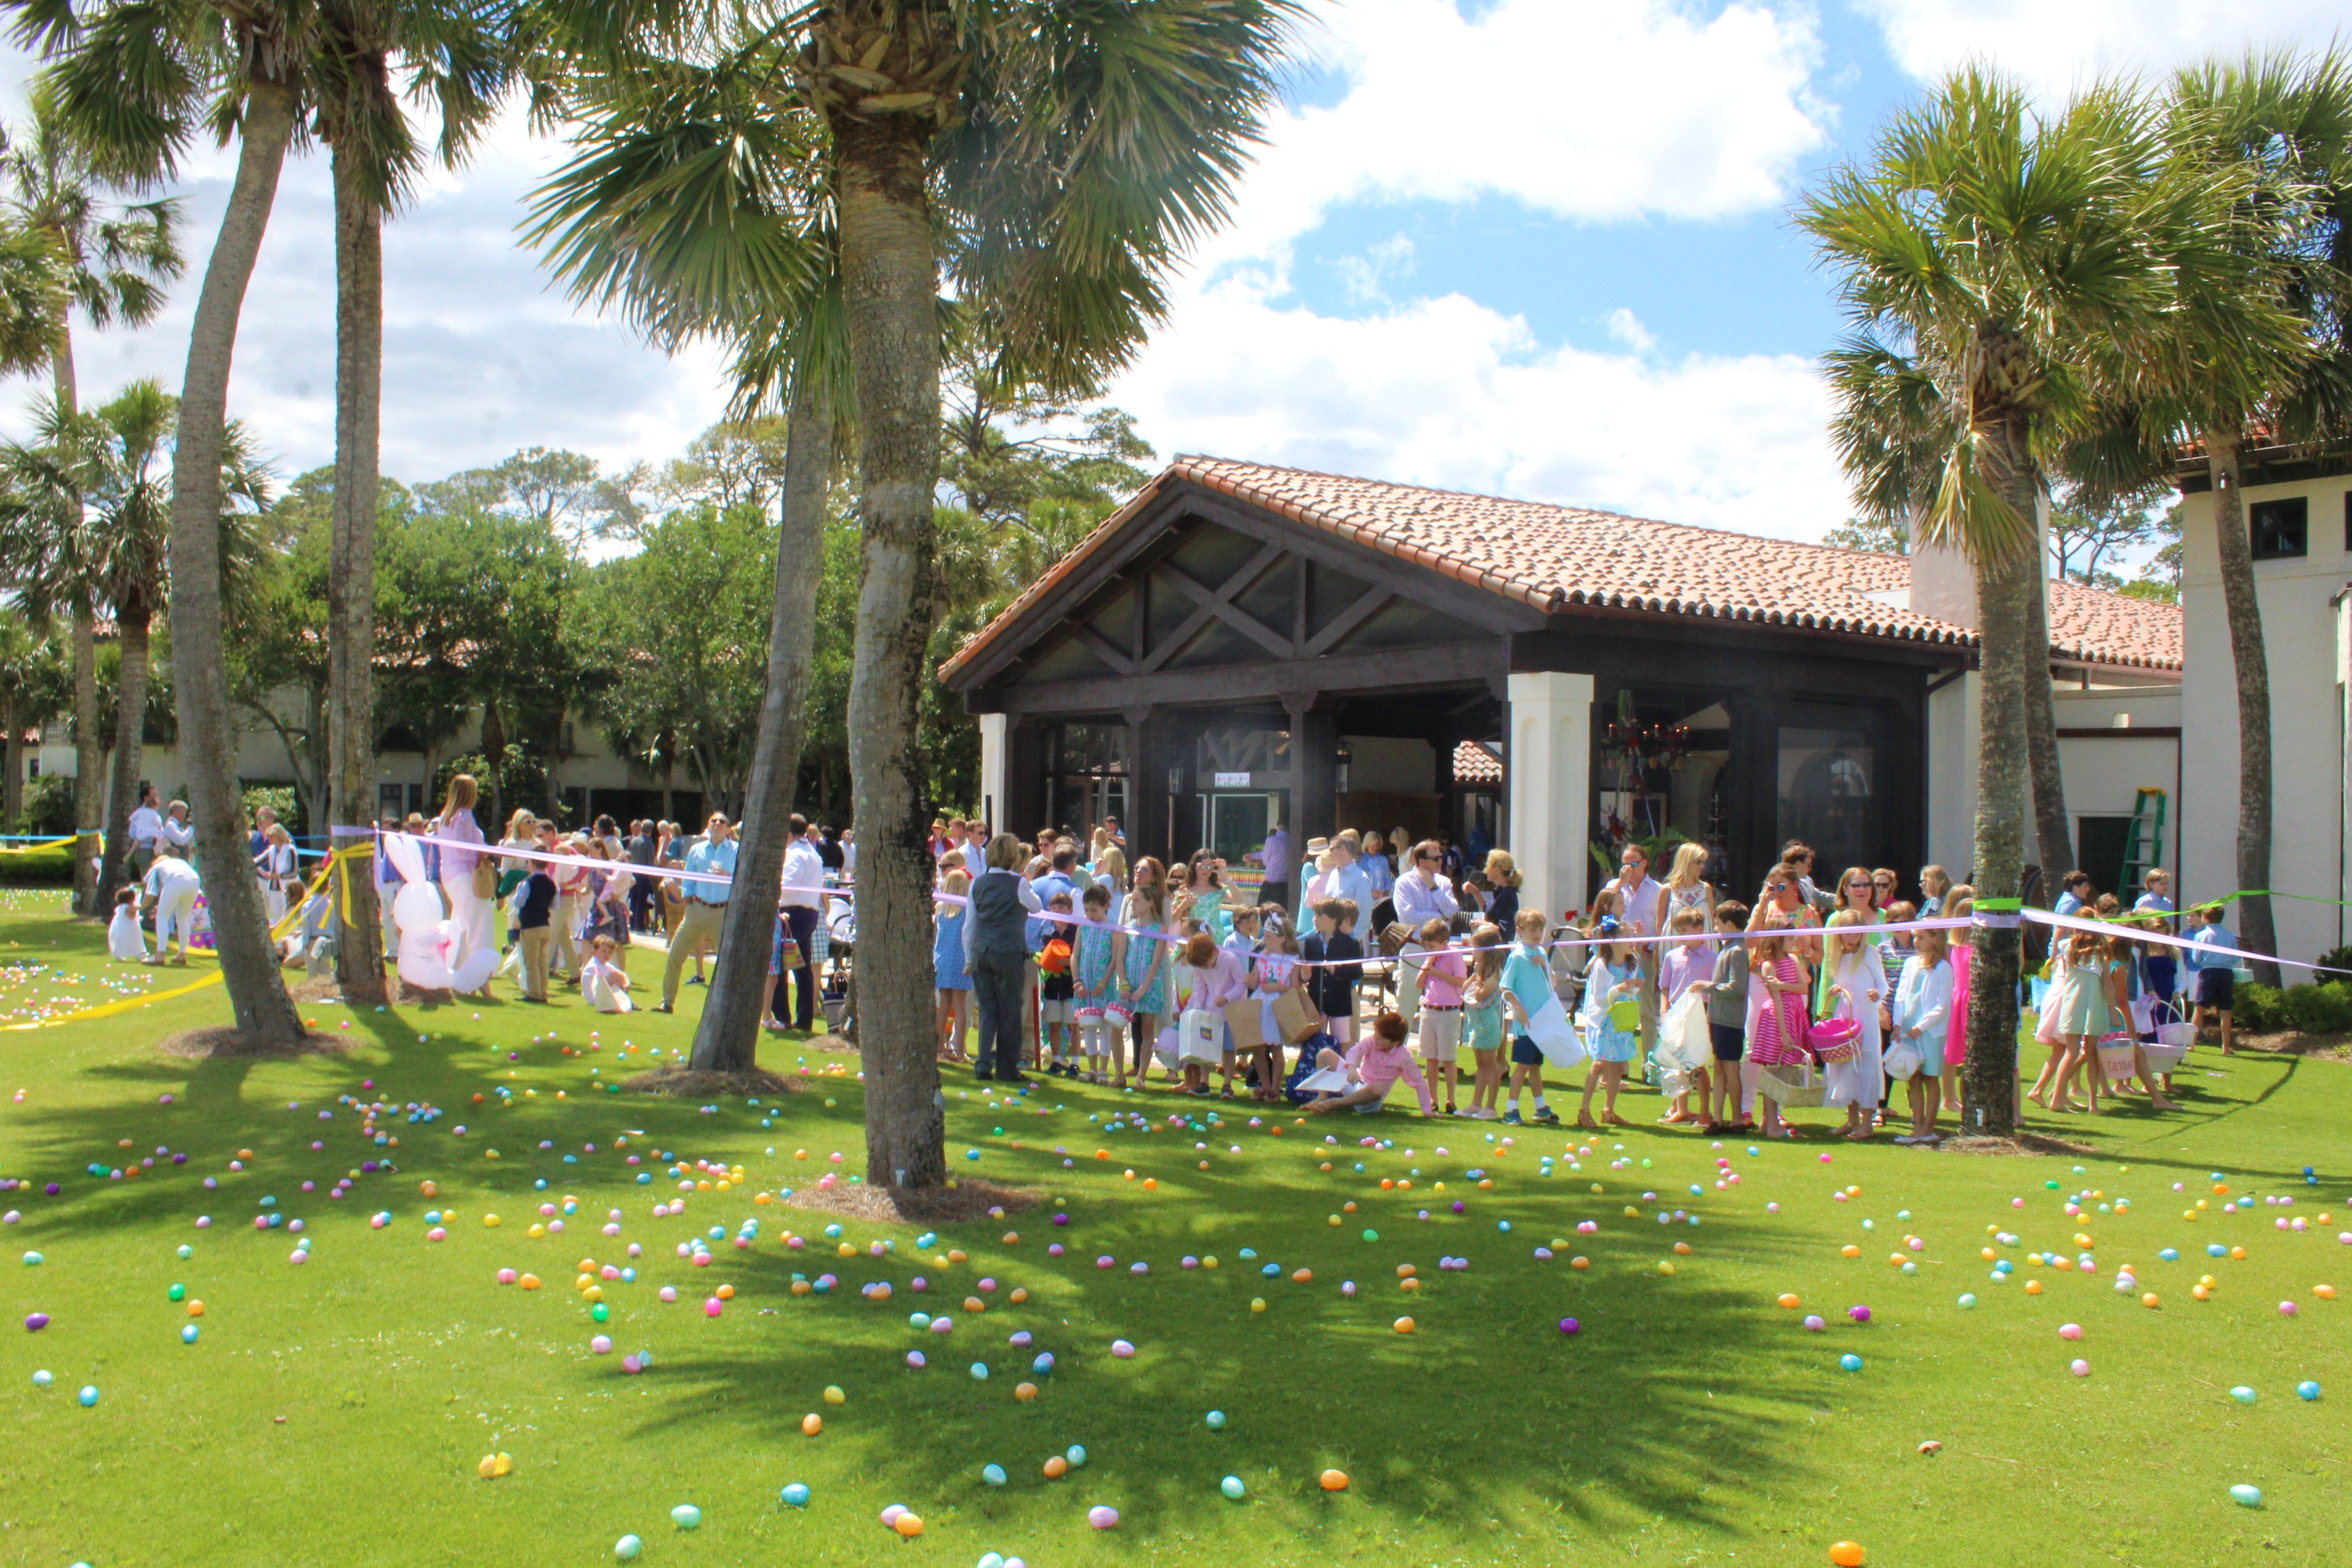 View your photos from Easter Weekend!